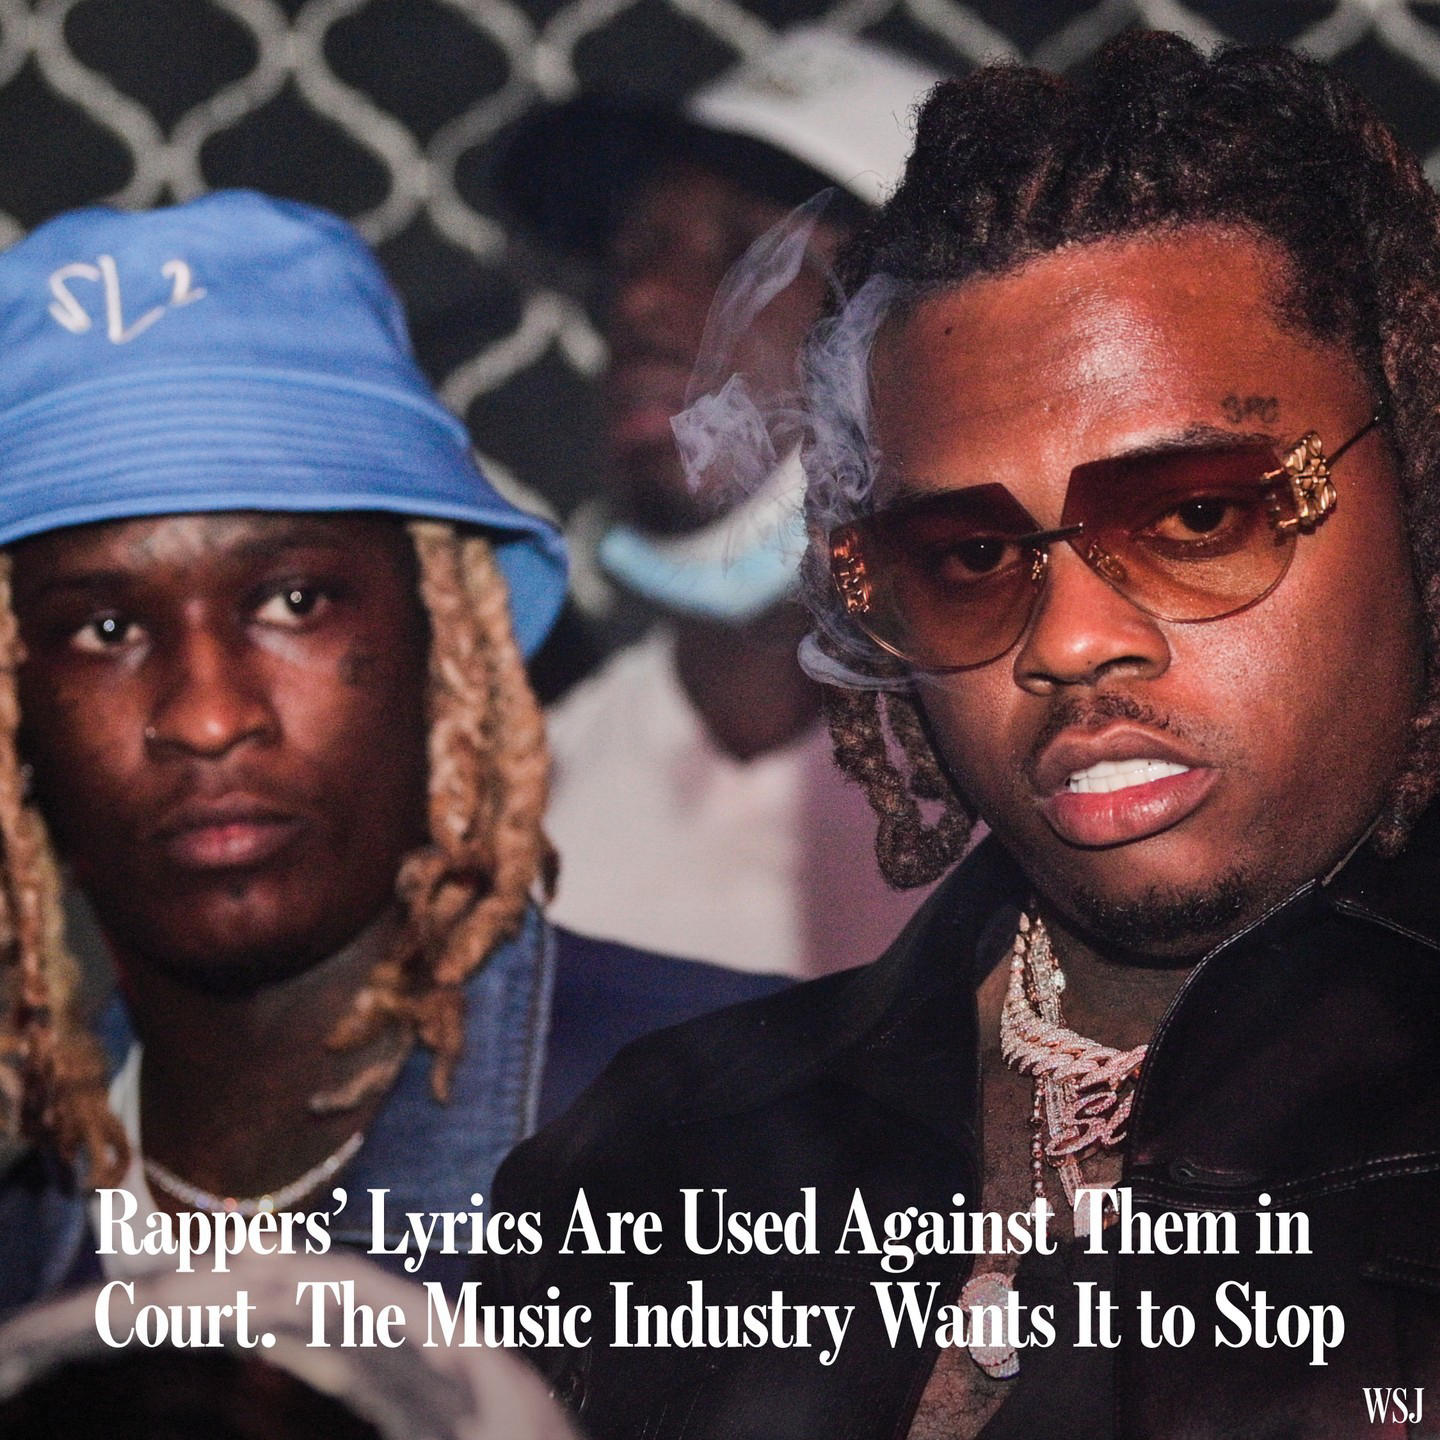 The Wall Street Journal - Rappers Young Thug and Gunna are behind bars in Atlanta on gang-related ch